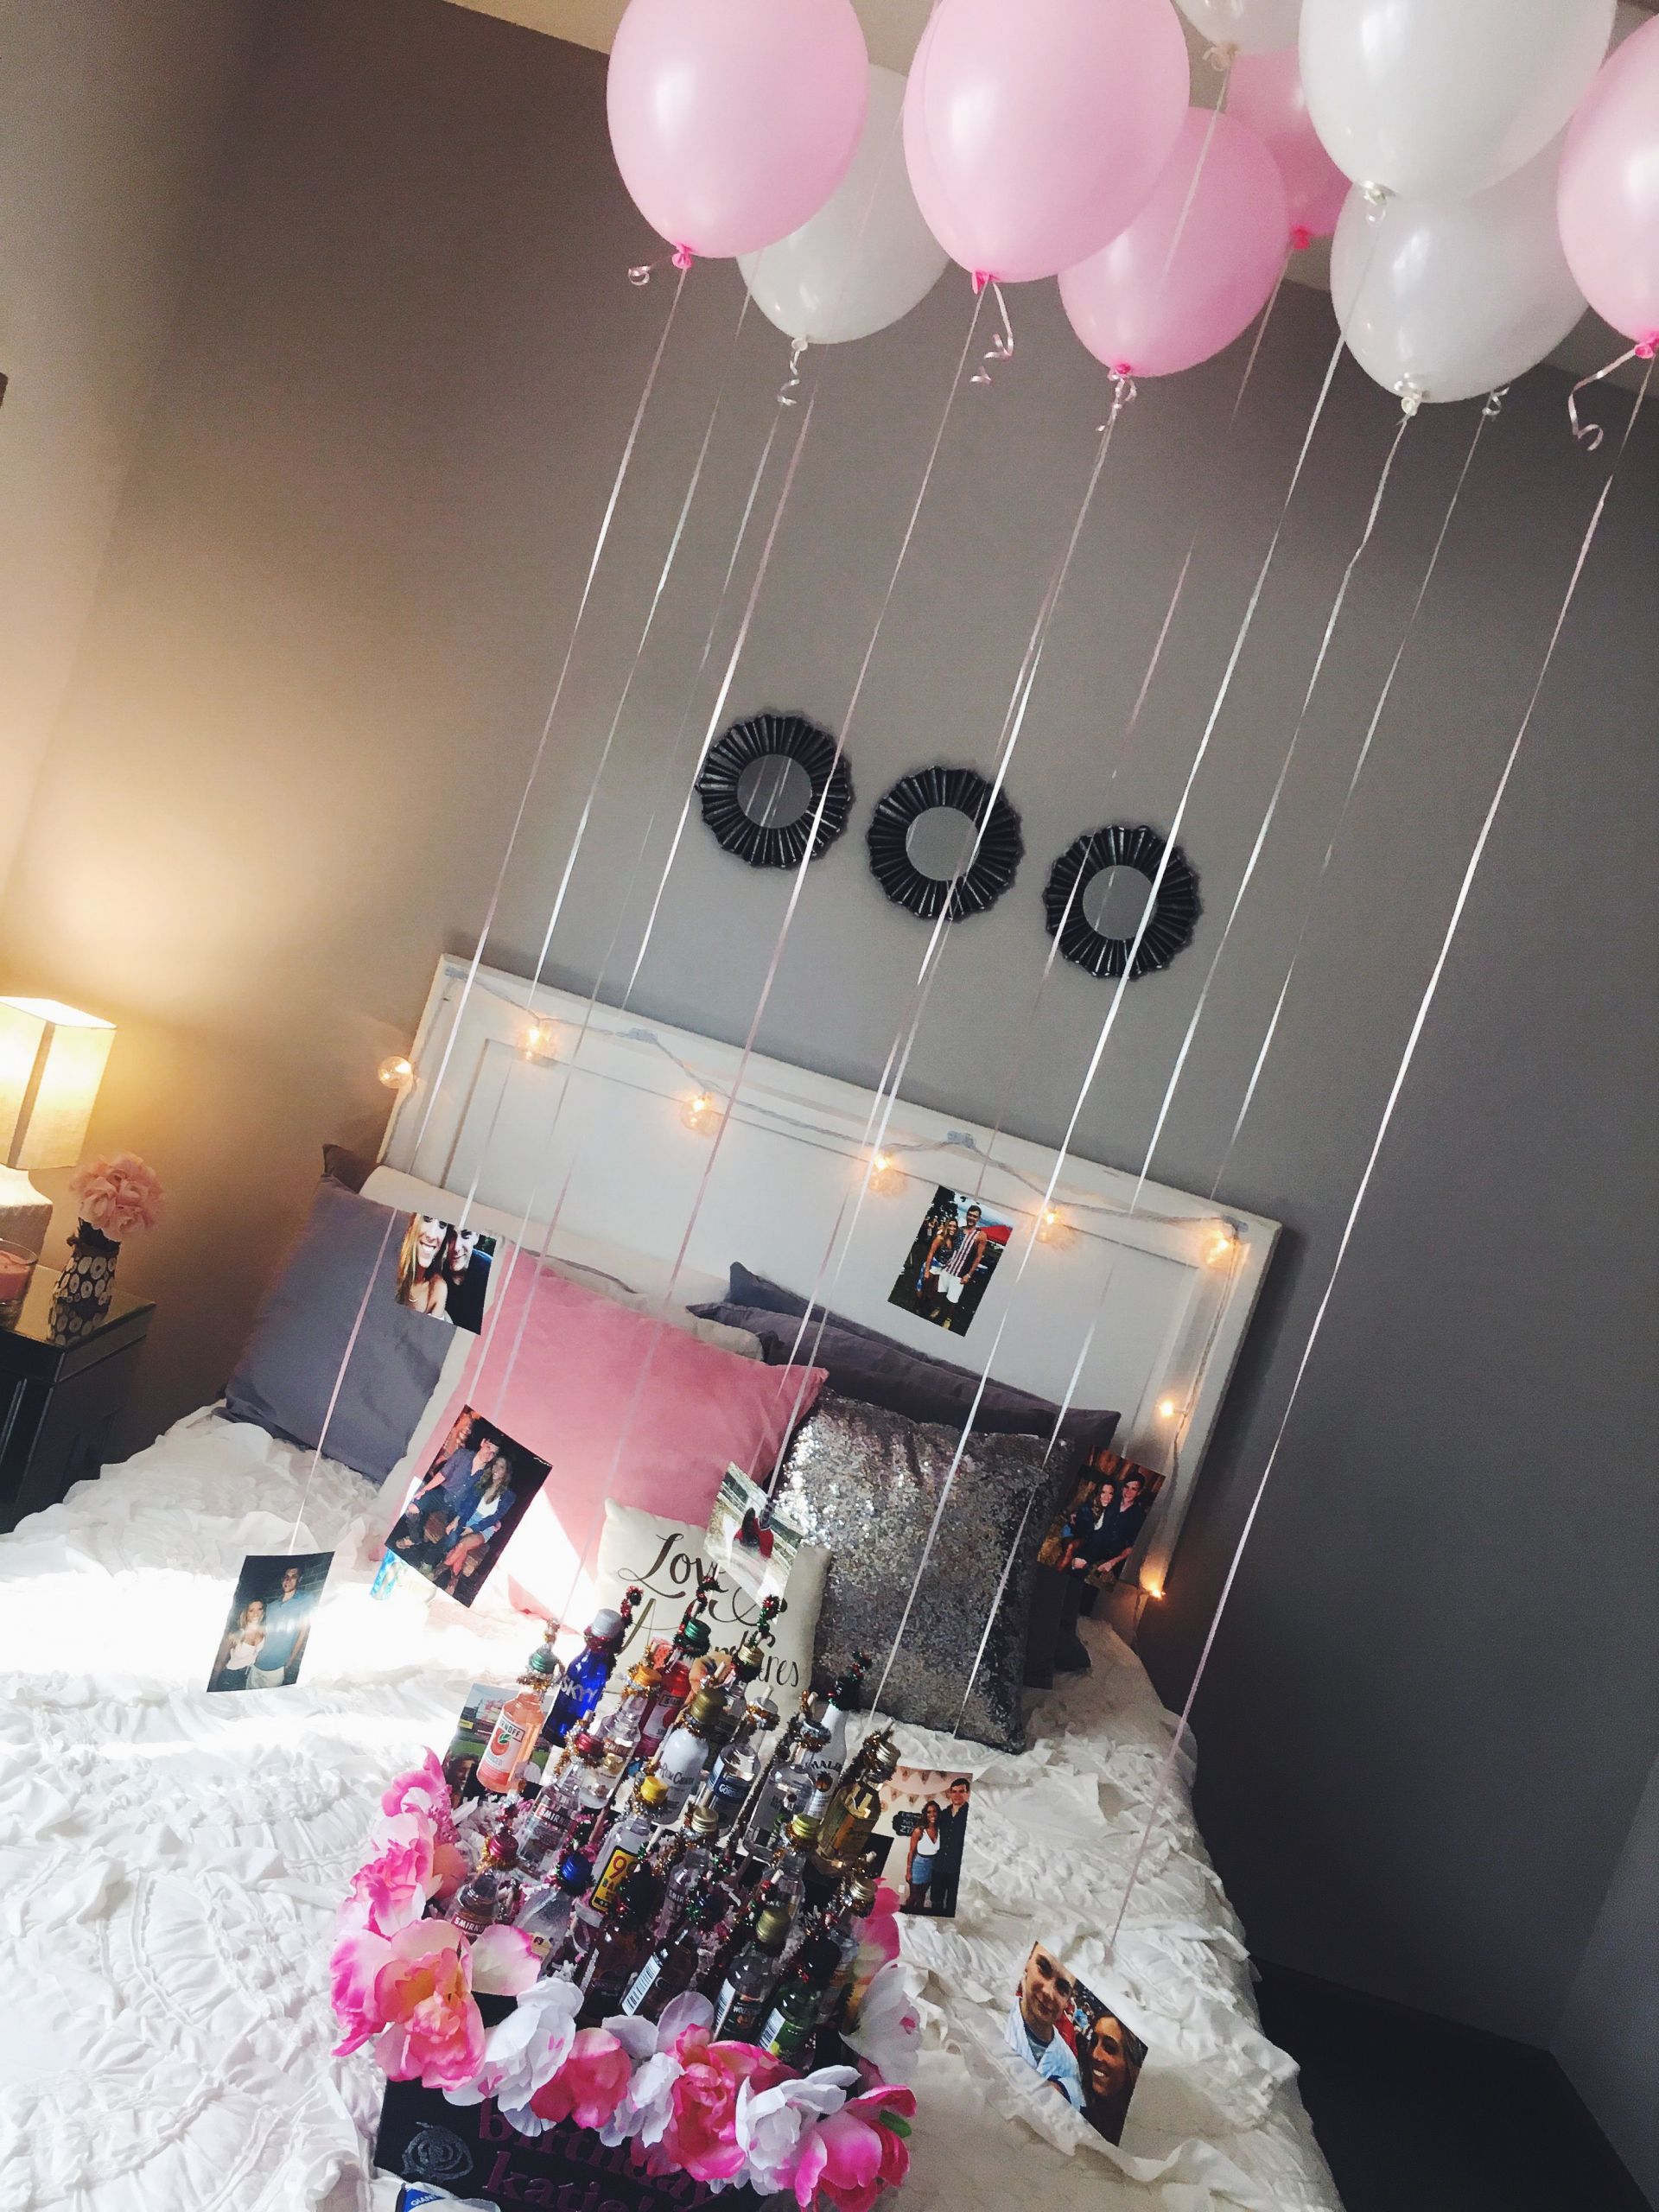 Diy Girlfriend Birthday Gift Ideas
 easy and cute decorations for a friend or girlfriends 21st